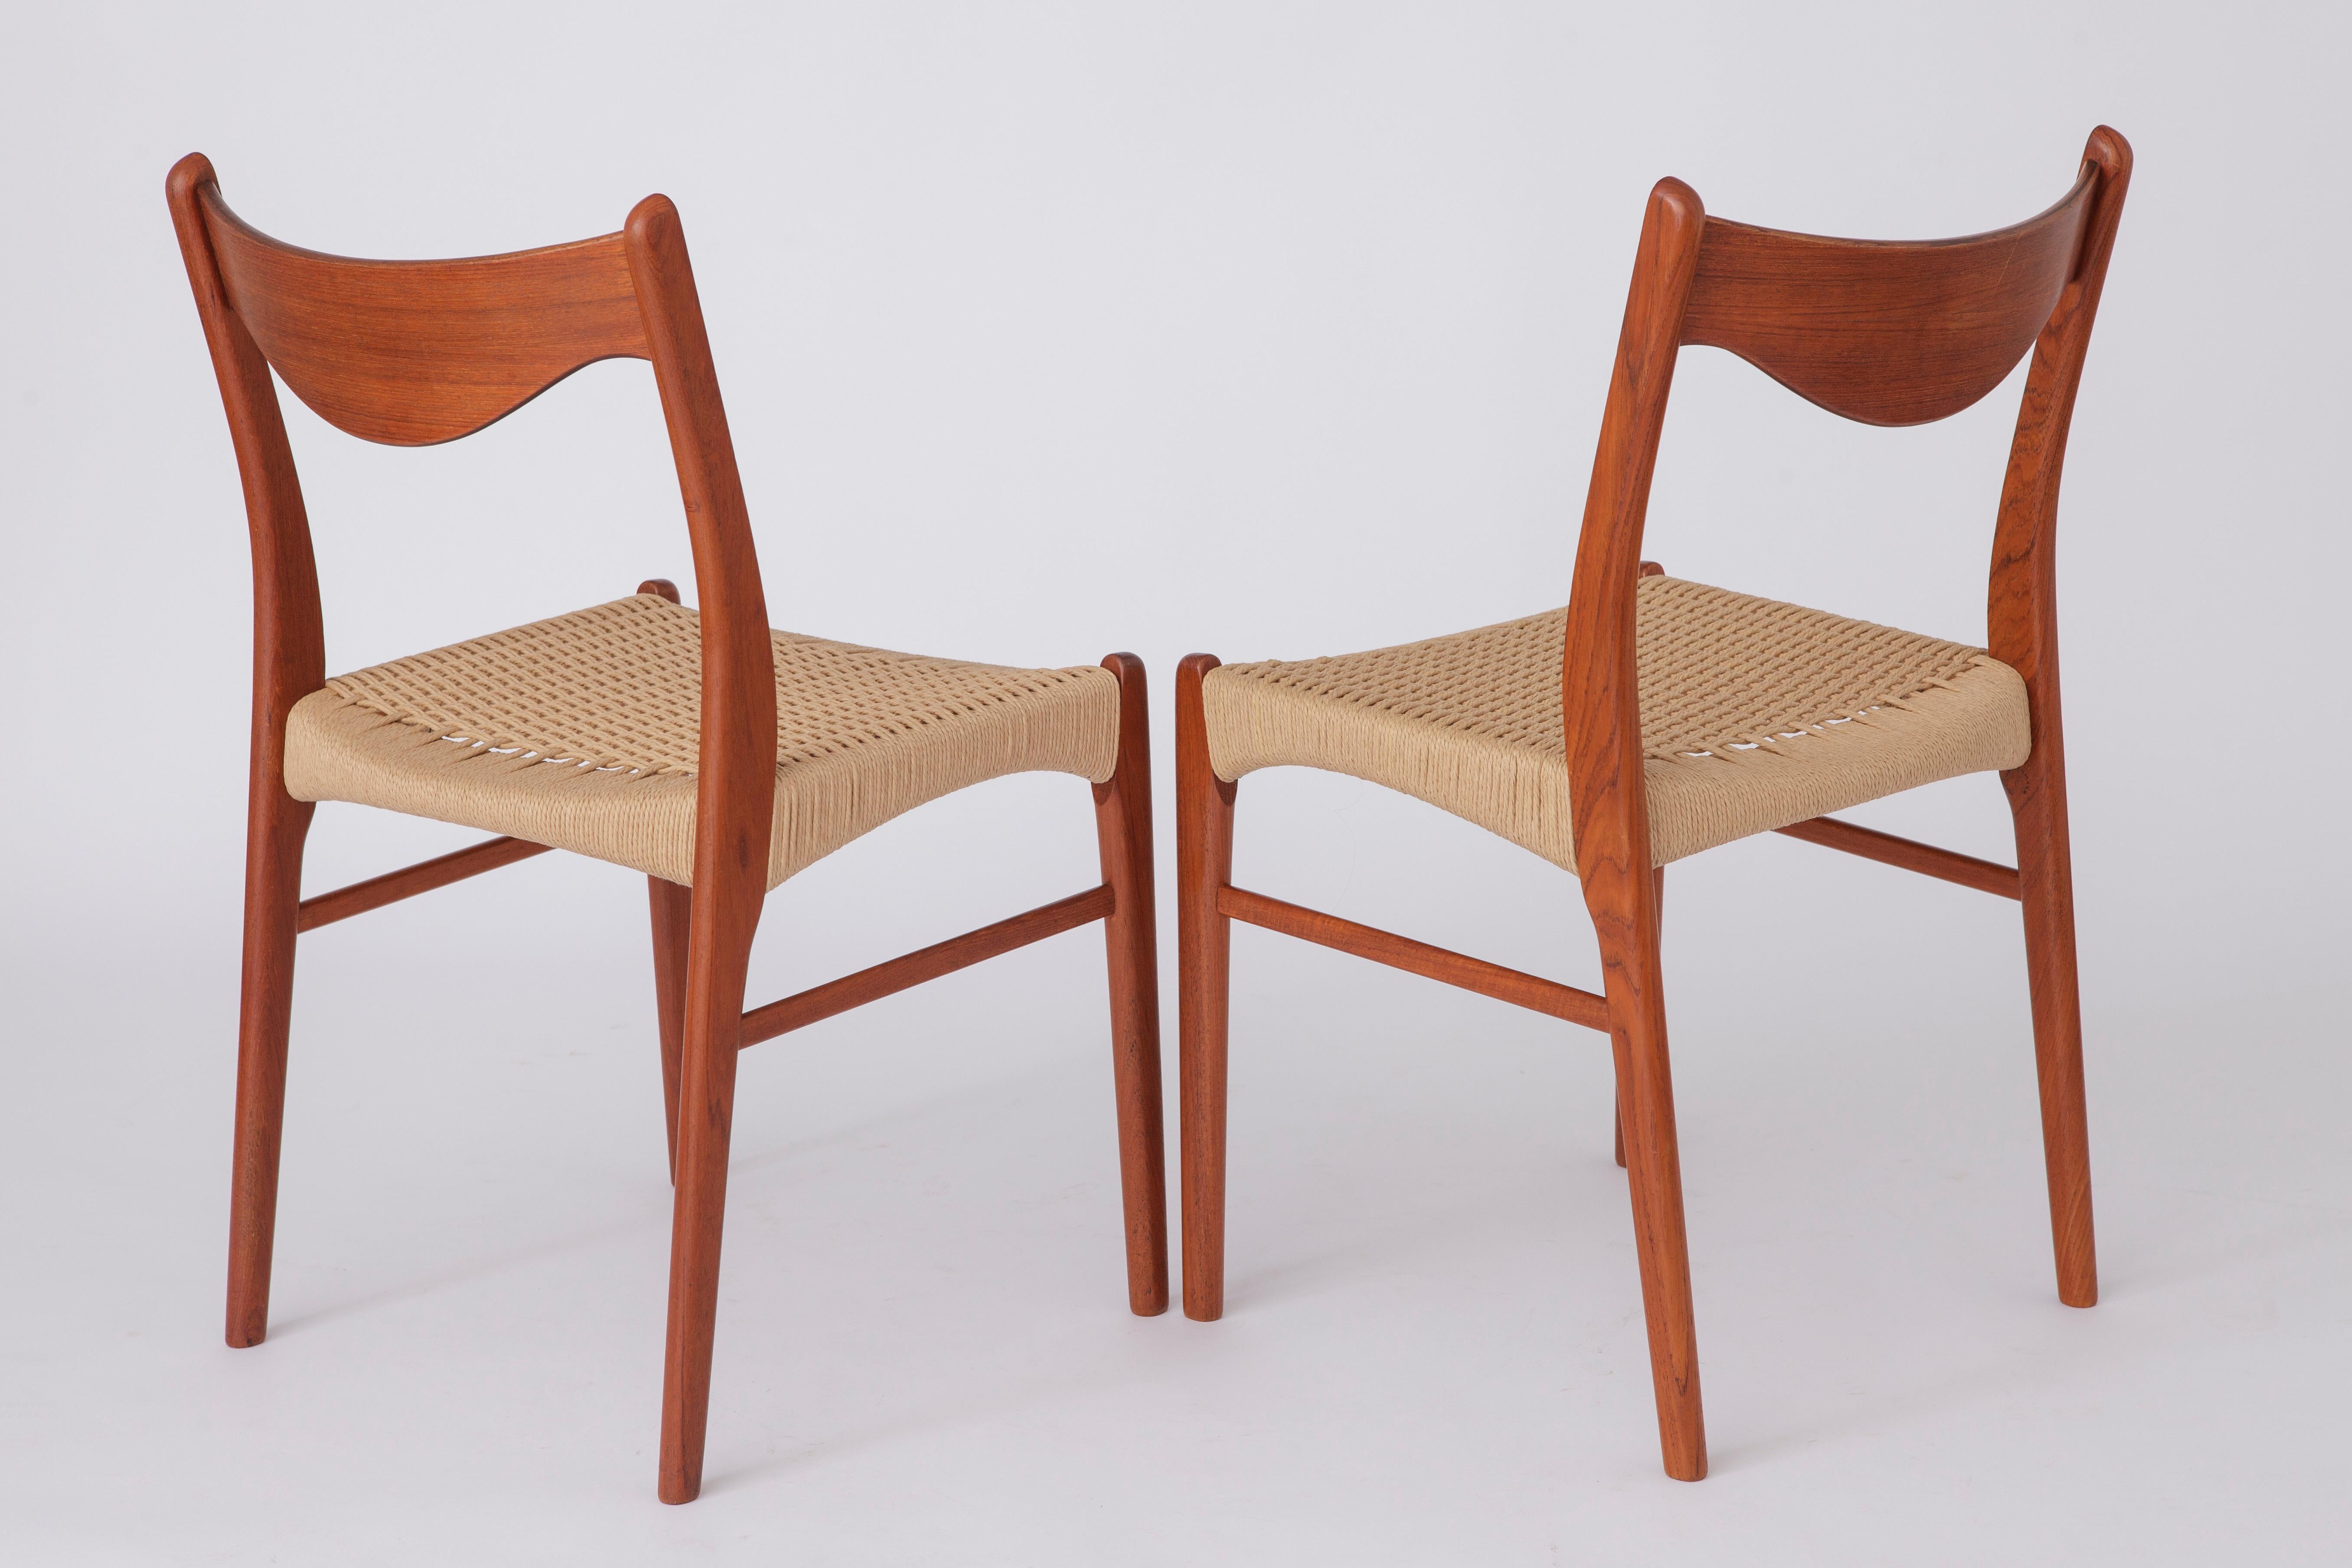 Polished 4 Arne Wahl Iversen Midcentury Teak Dining Chairs with Papercord Seats 1960s